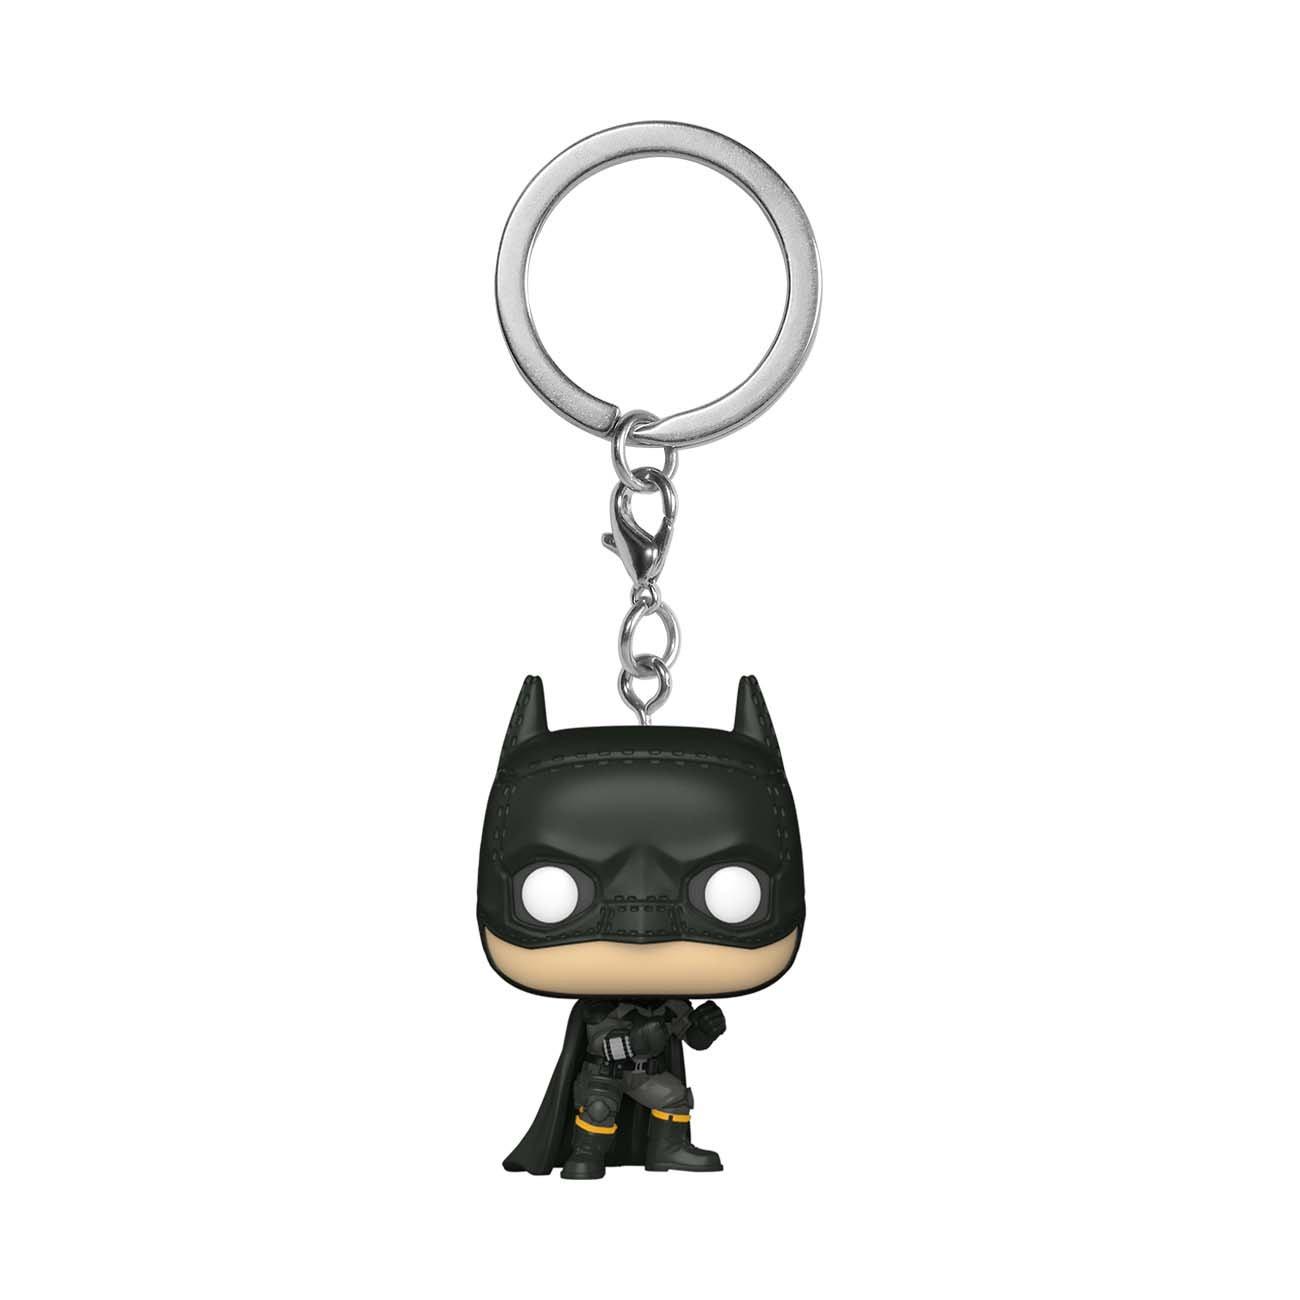 Keychain Stylized Collectable Licensed Justice League Movie Batman Pocket Pop 